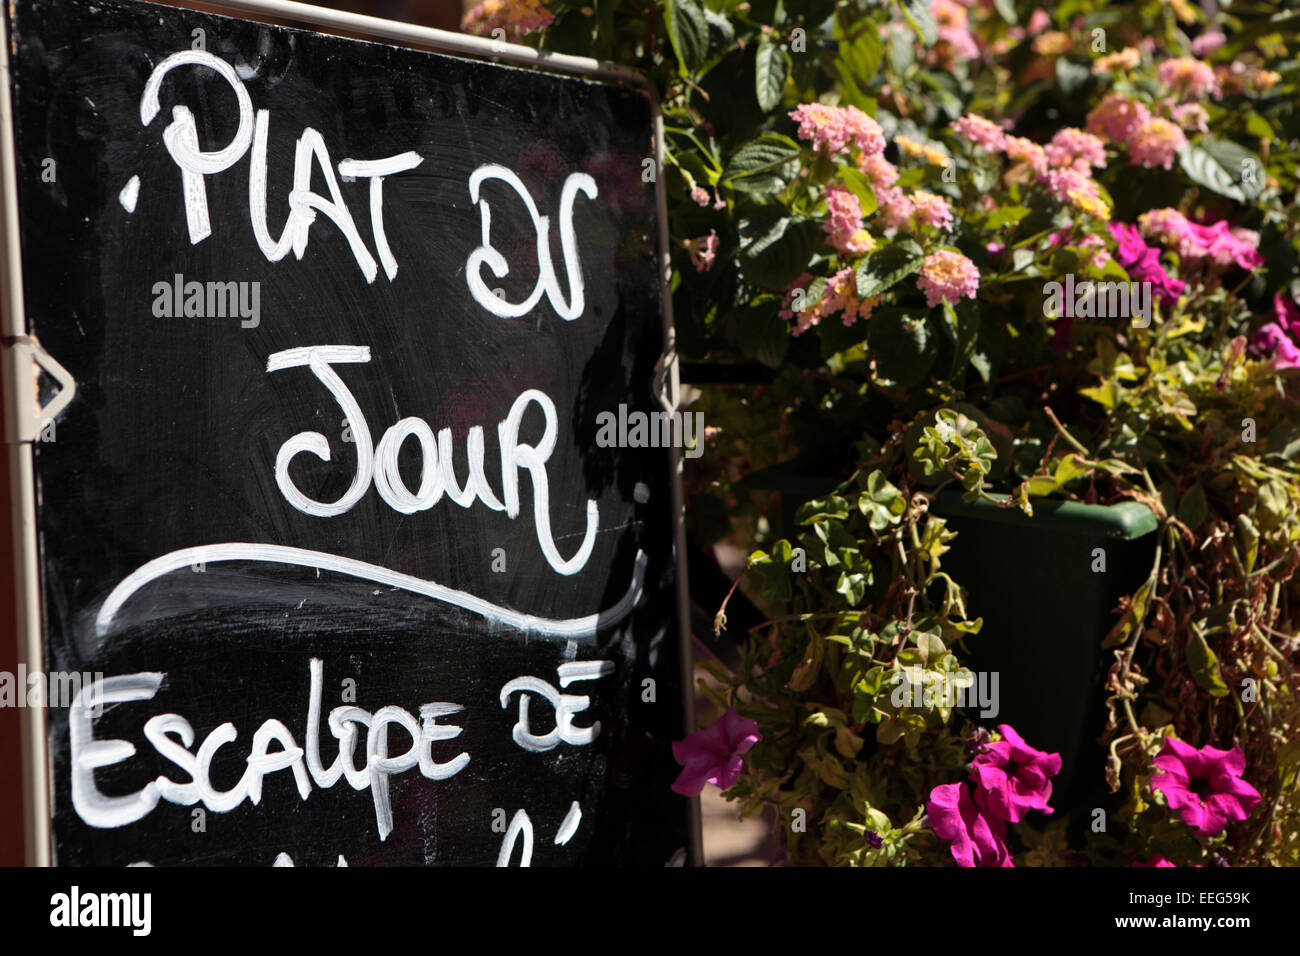 Paris restaurant in France with menu board and flower display. Stock Photo